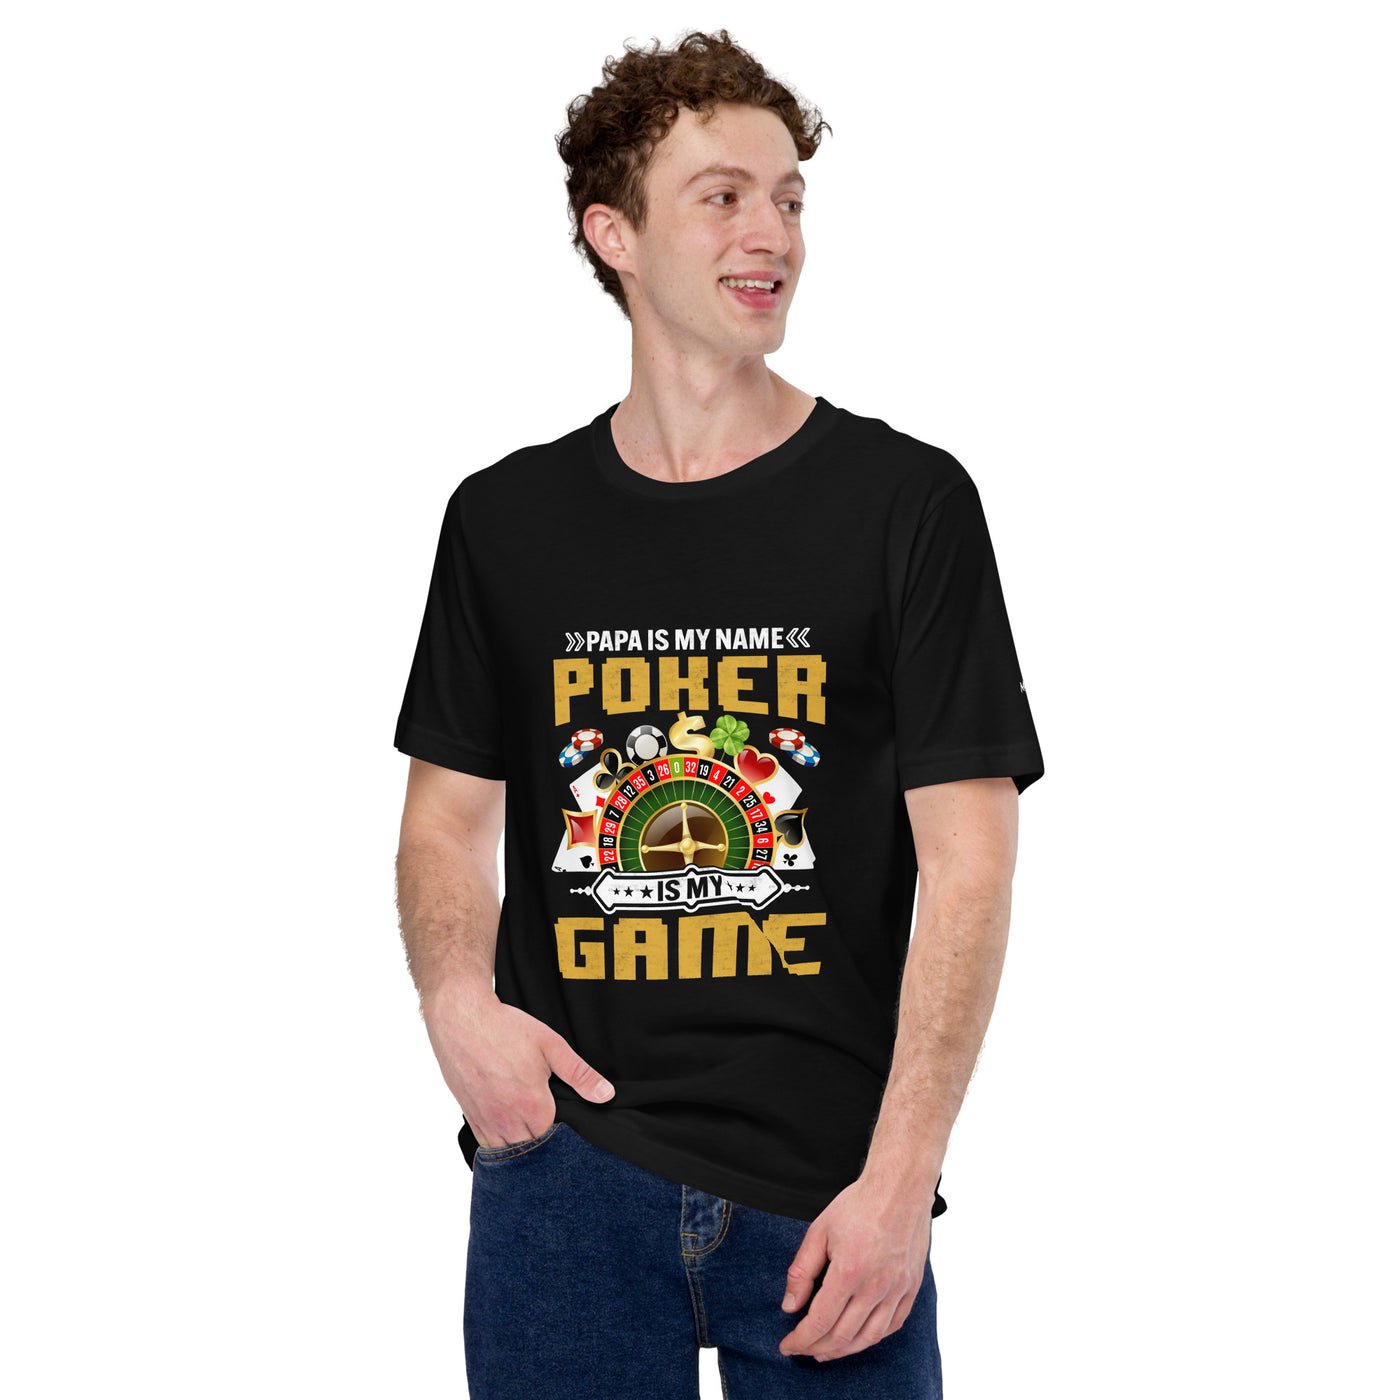 Papa Is my Name; Poker Is my Game - Unisex t-shirt